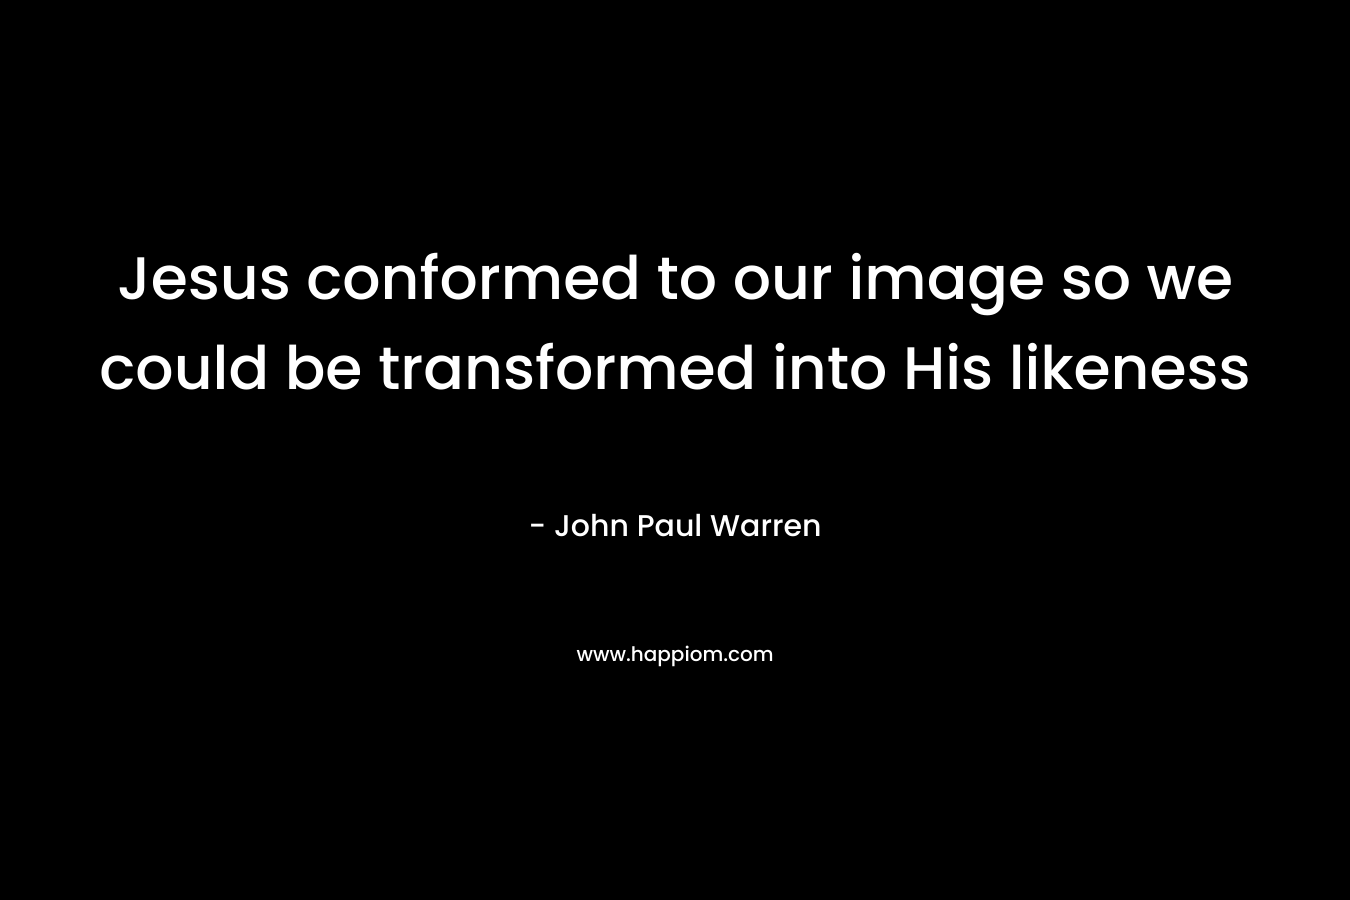 Jesus conformed to our image so we could be transformed into His likeness – John Paul Warren